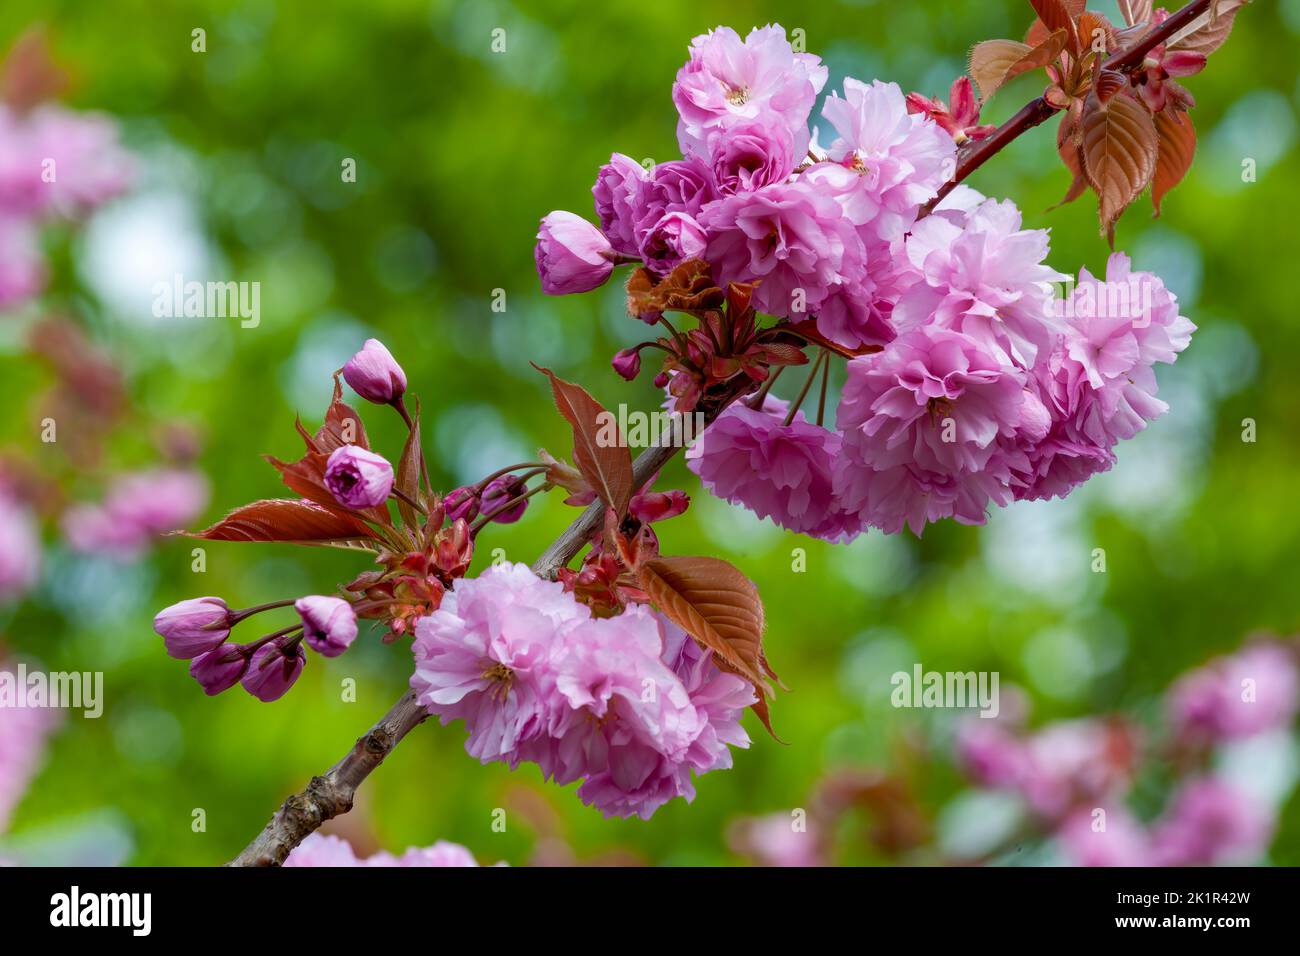 Beautiful pink Cherry Tree blossom photographed against a green foliage background Stock Photo